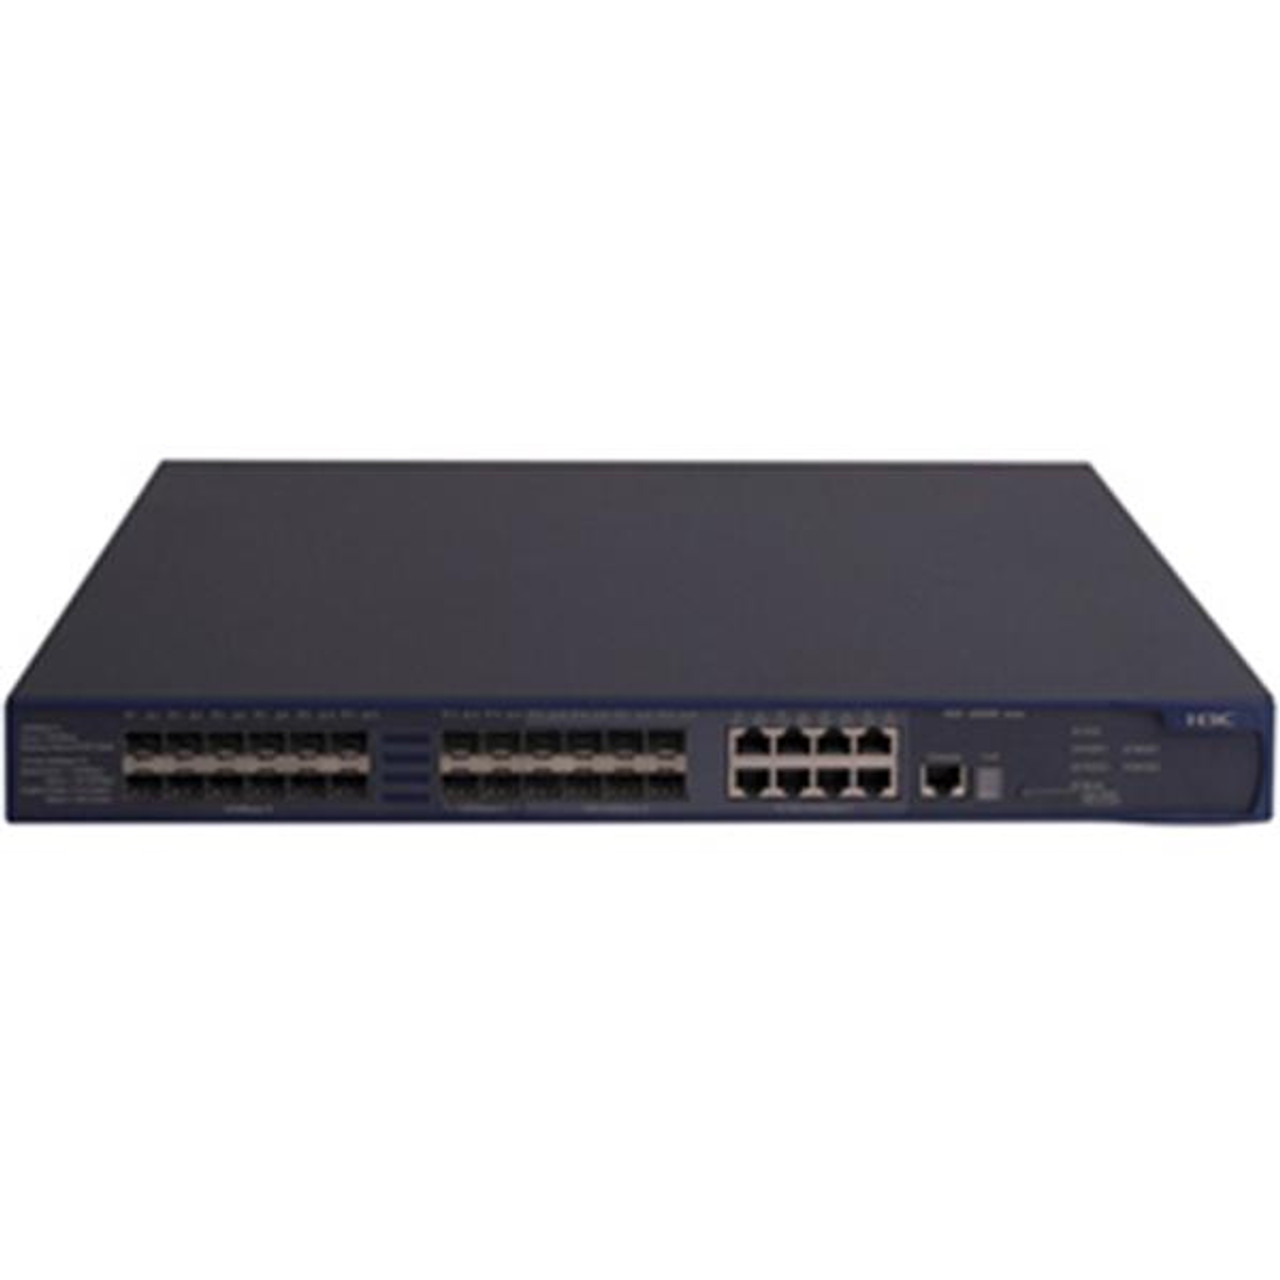 5820-14XG-SFP+ HP A5820-14XG-SFP+ Layer 3 Switch 4-Ports Manageable 4 x RJ-45 Stack Port 17 x Expansion Slots (Refurbished)